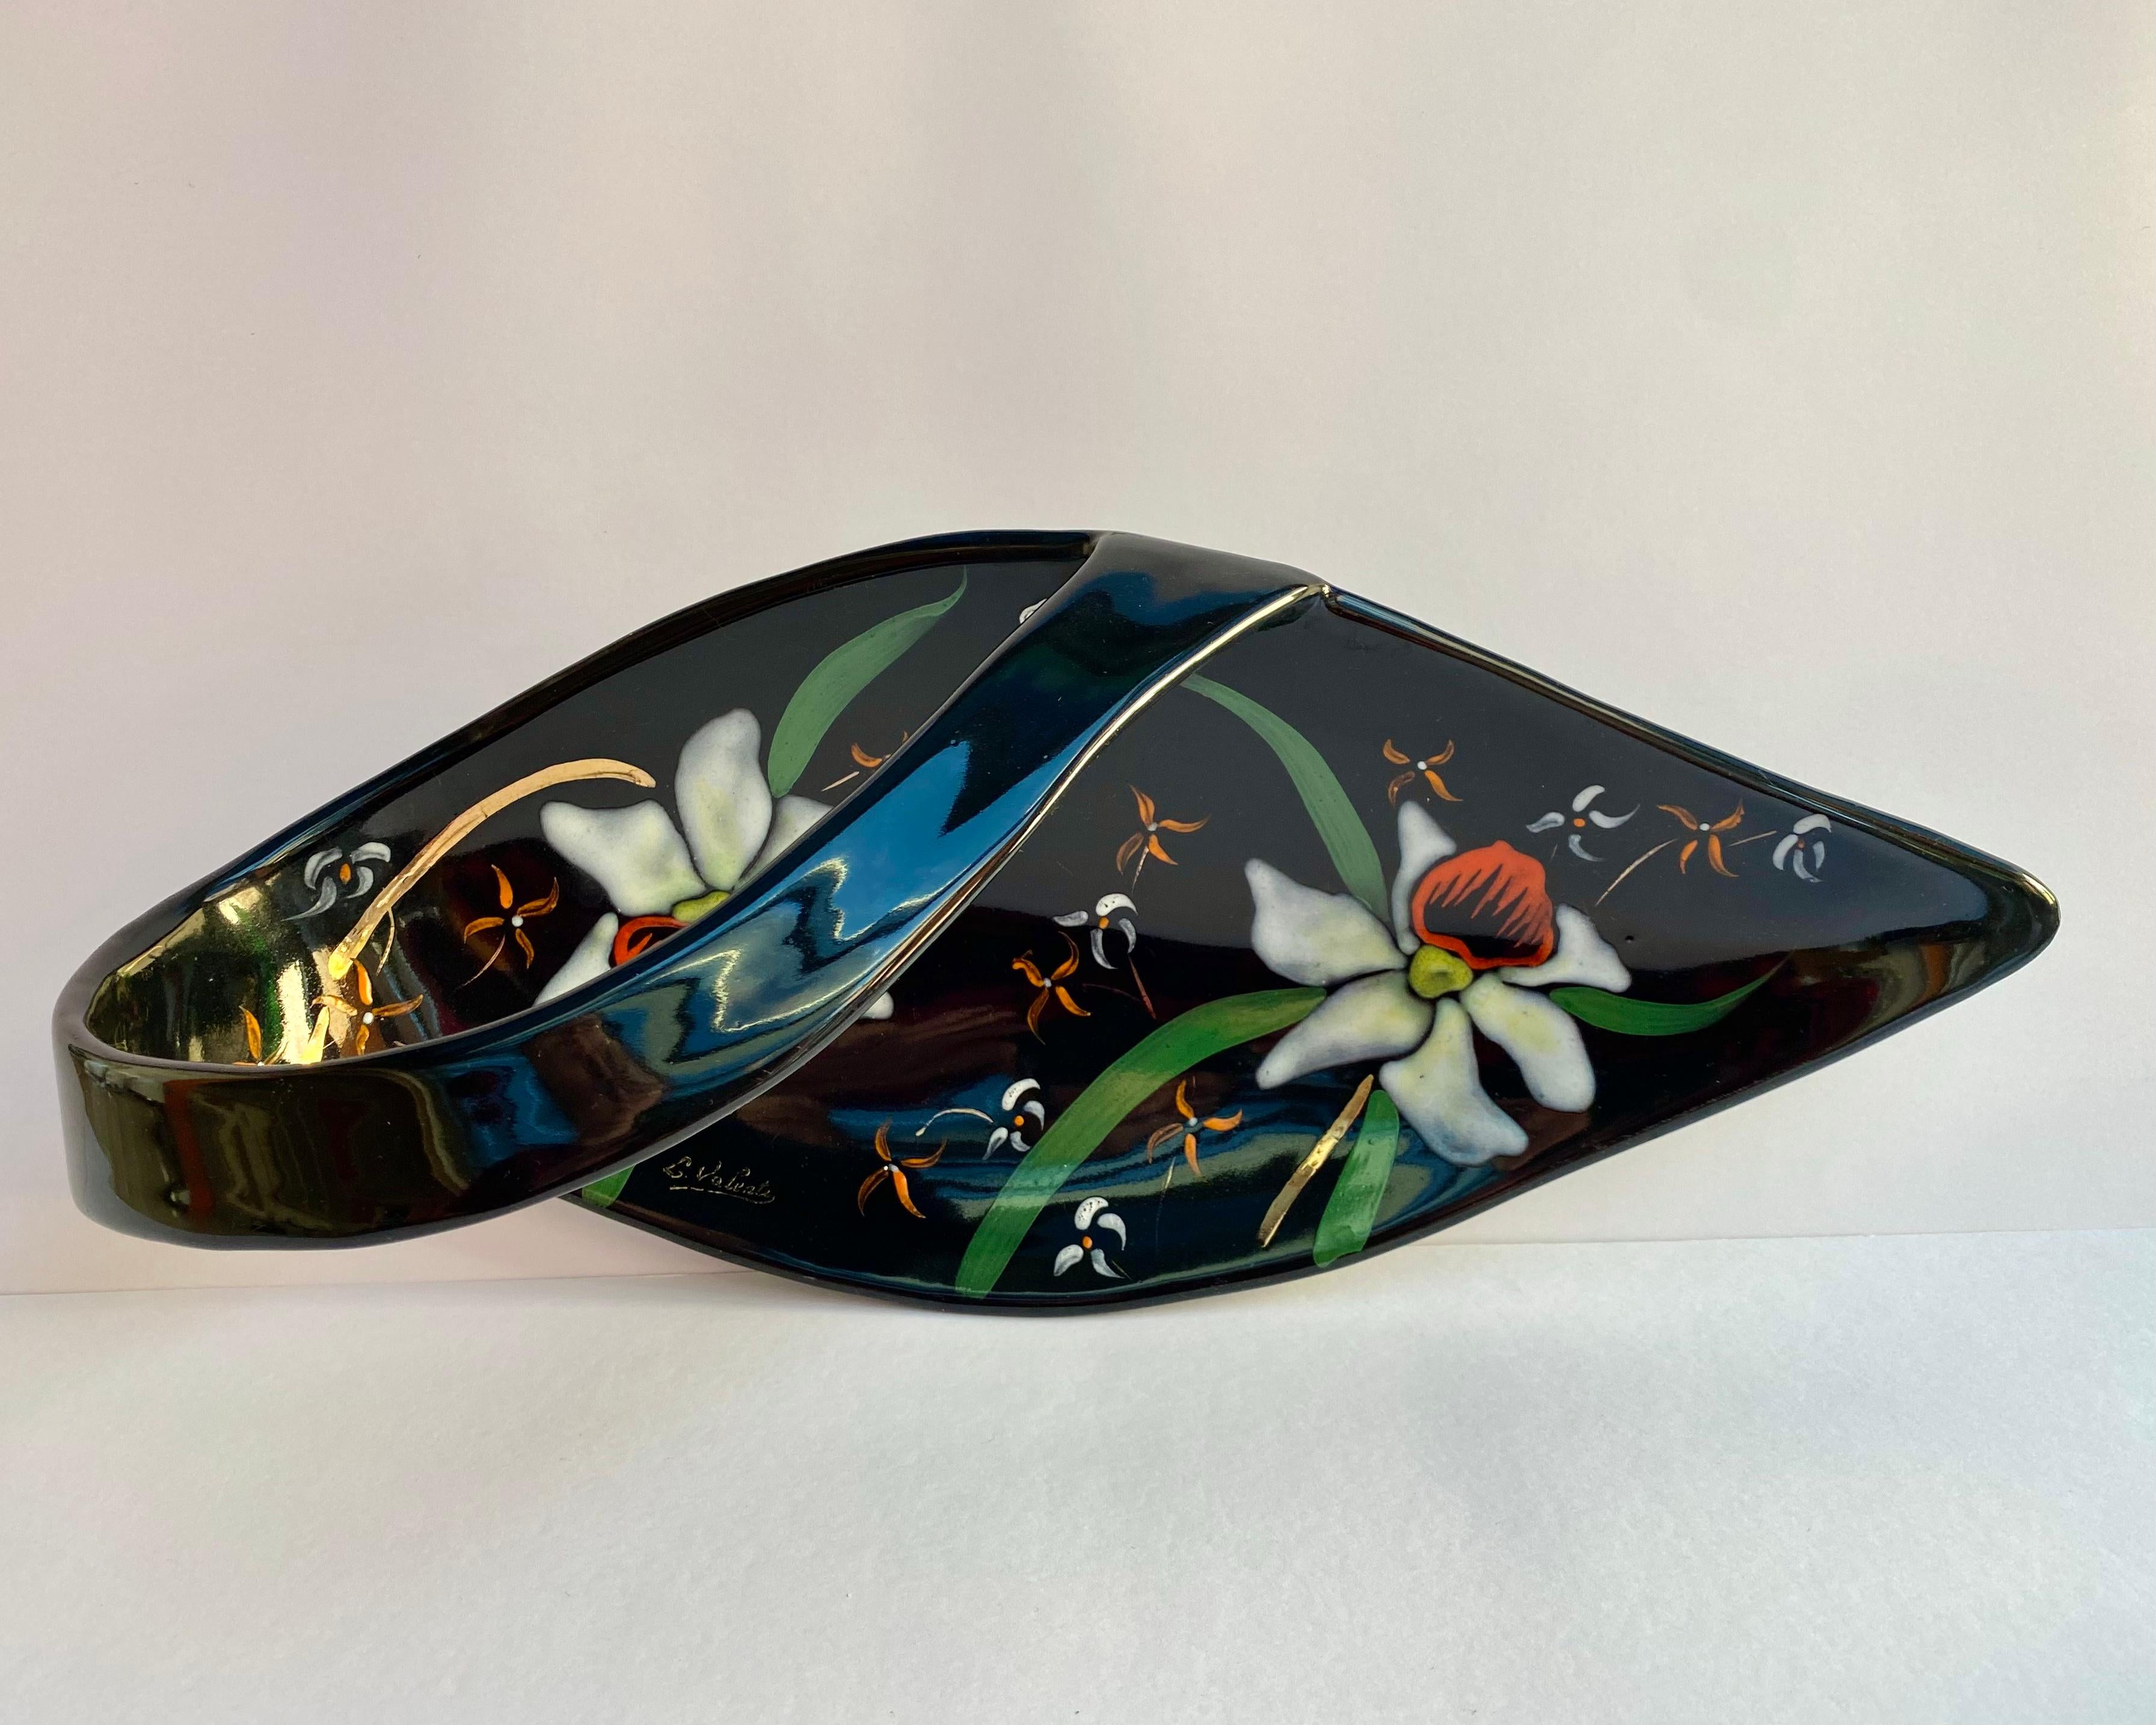 An amazing Mid-Century period faience bowl, made in France by the Emaux de Longwy art pottery workshop.

Made and signed by the ceramic artist Lea Valenti. 

The decoration consists of daffodils with green leaves on a glazed black